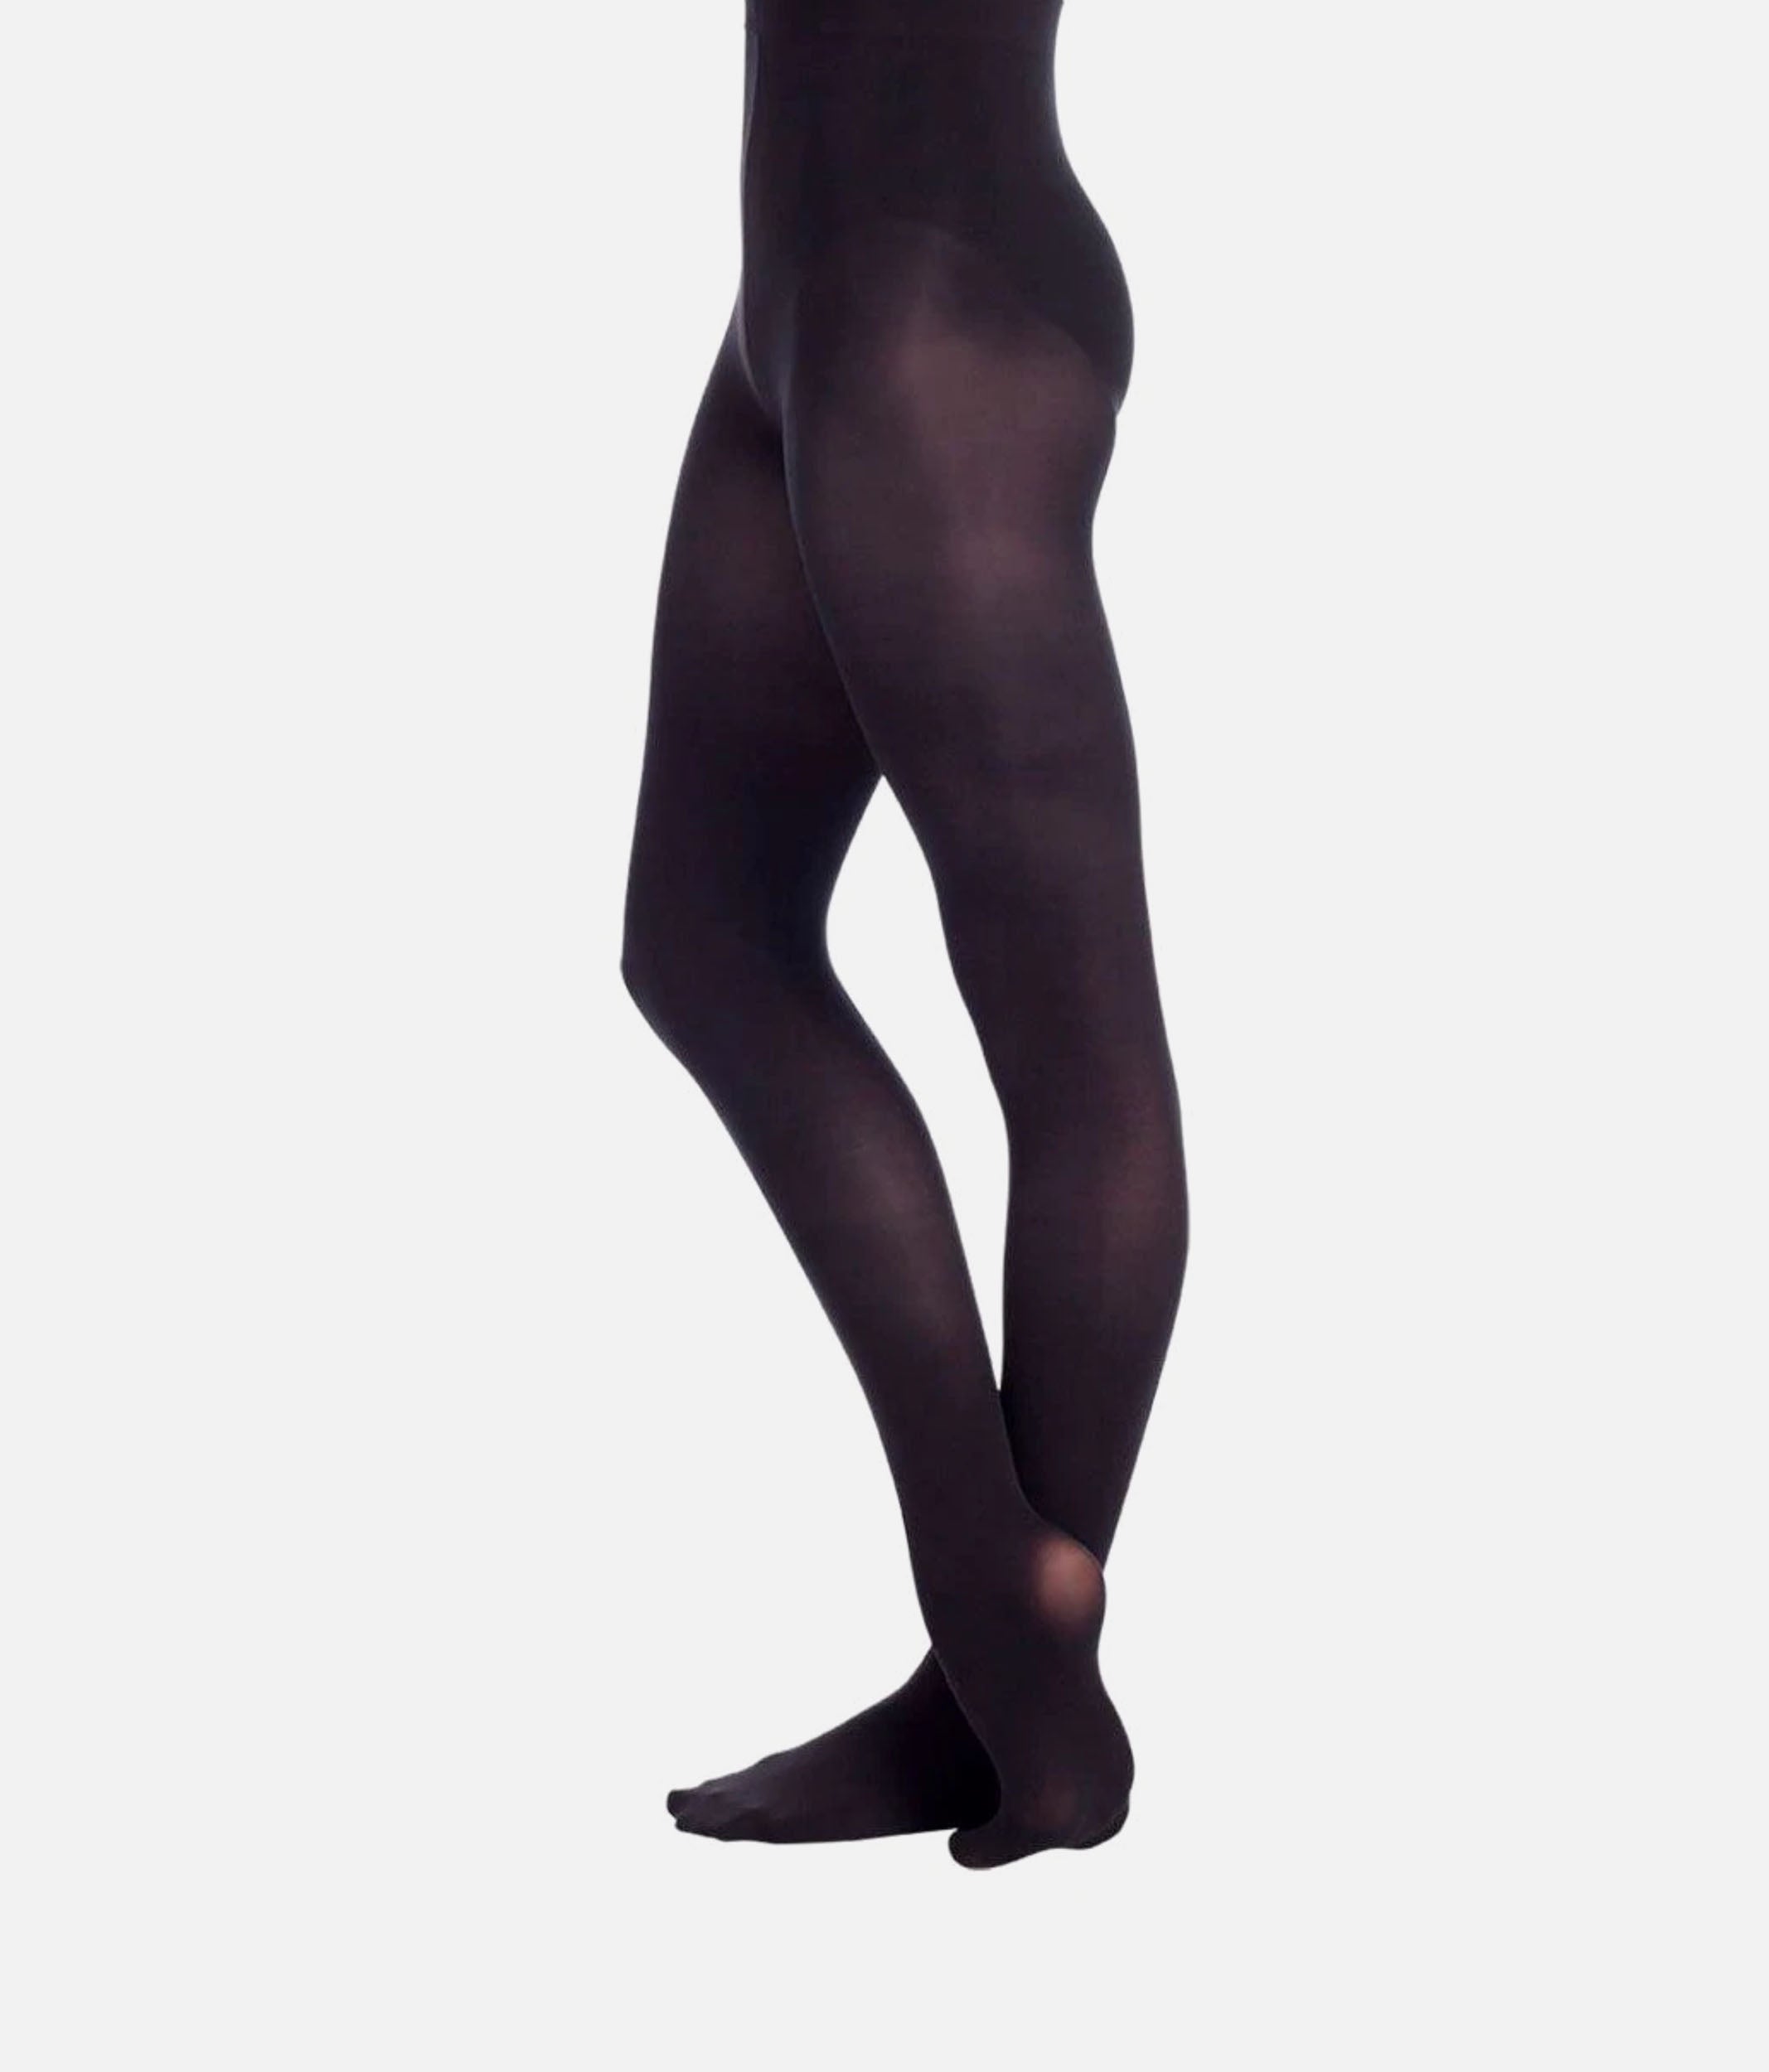 Children's Fully Footed Tights - TS 73